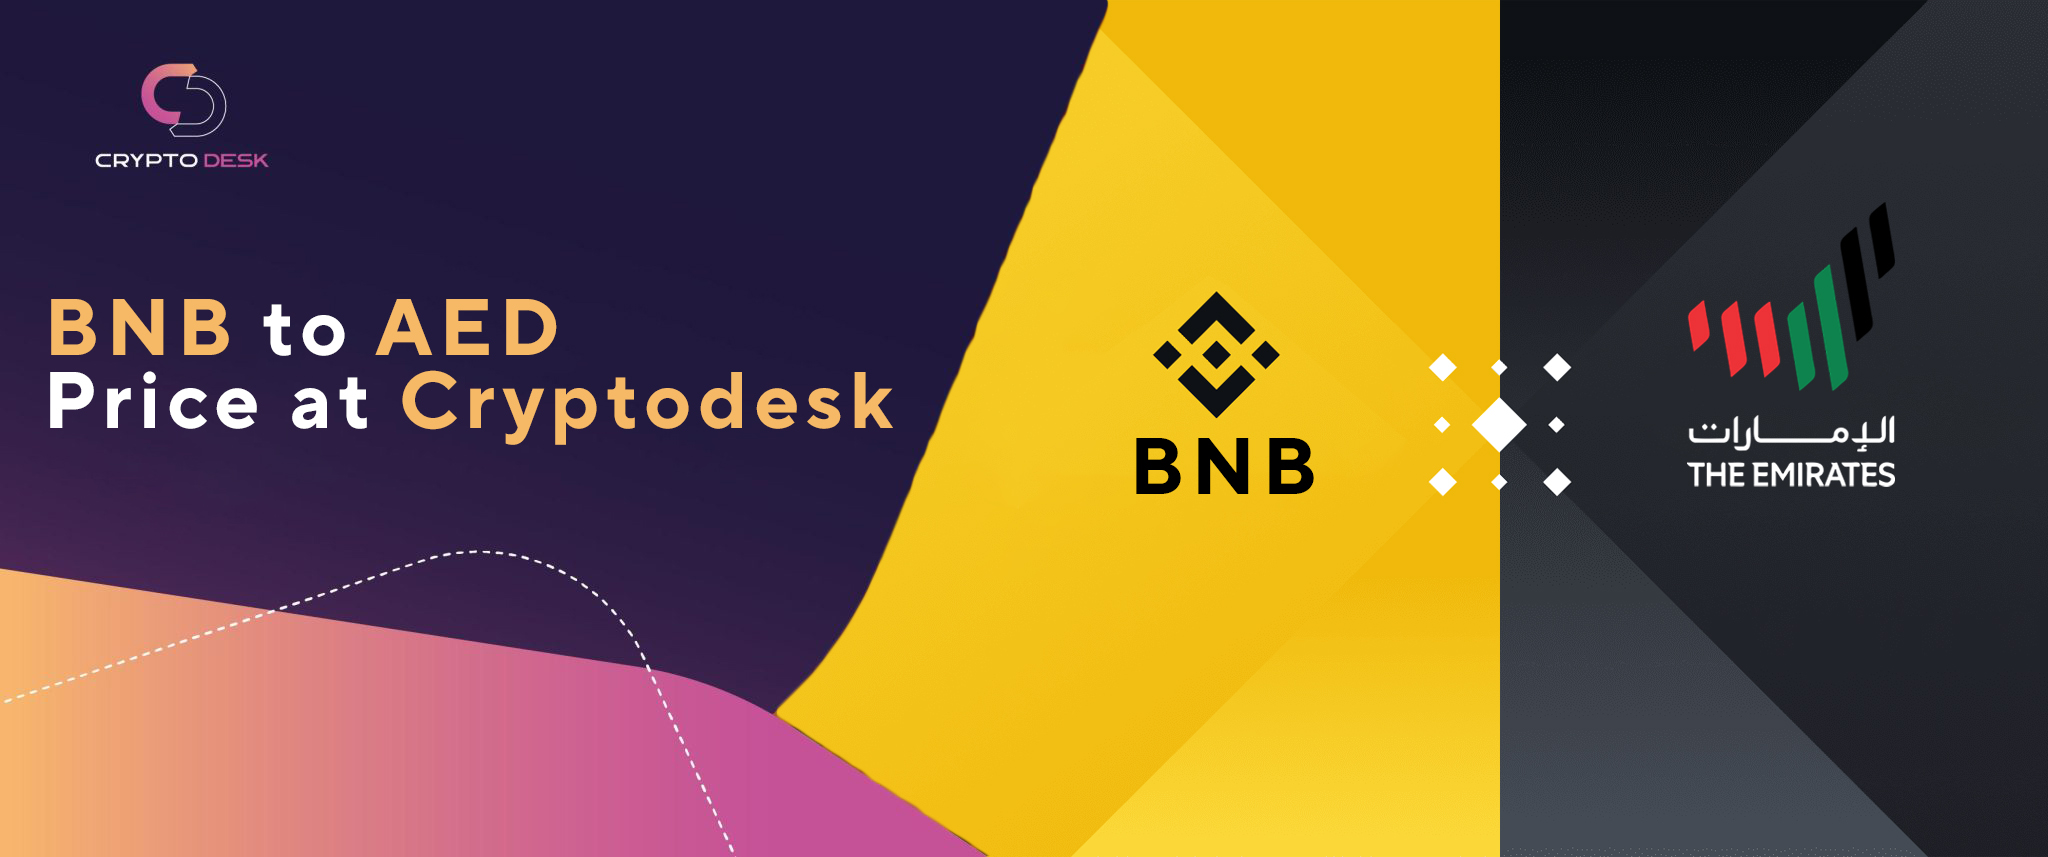 Convert BNB to AED Price at Crypto Desk Convert BNB to AED Price at Crypto Desk- Cryptodesk